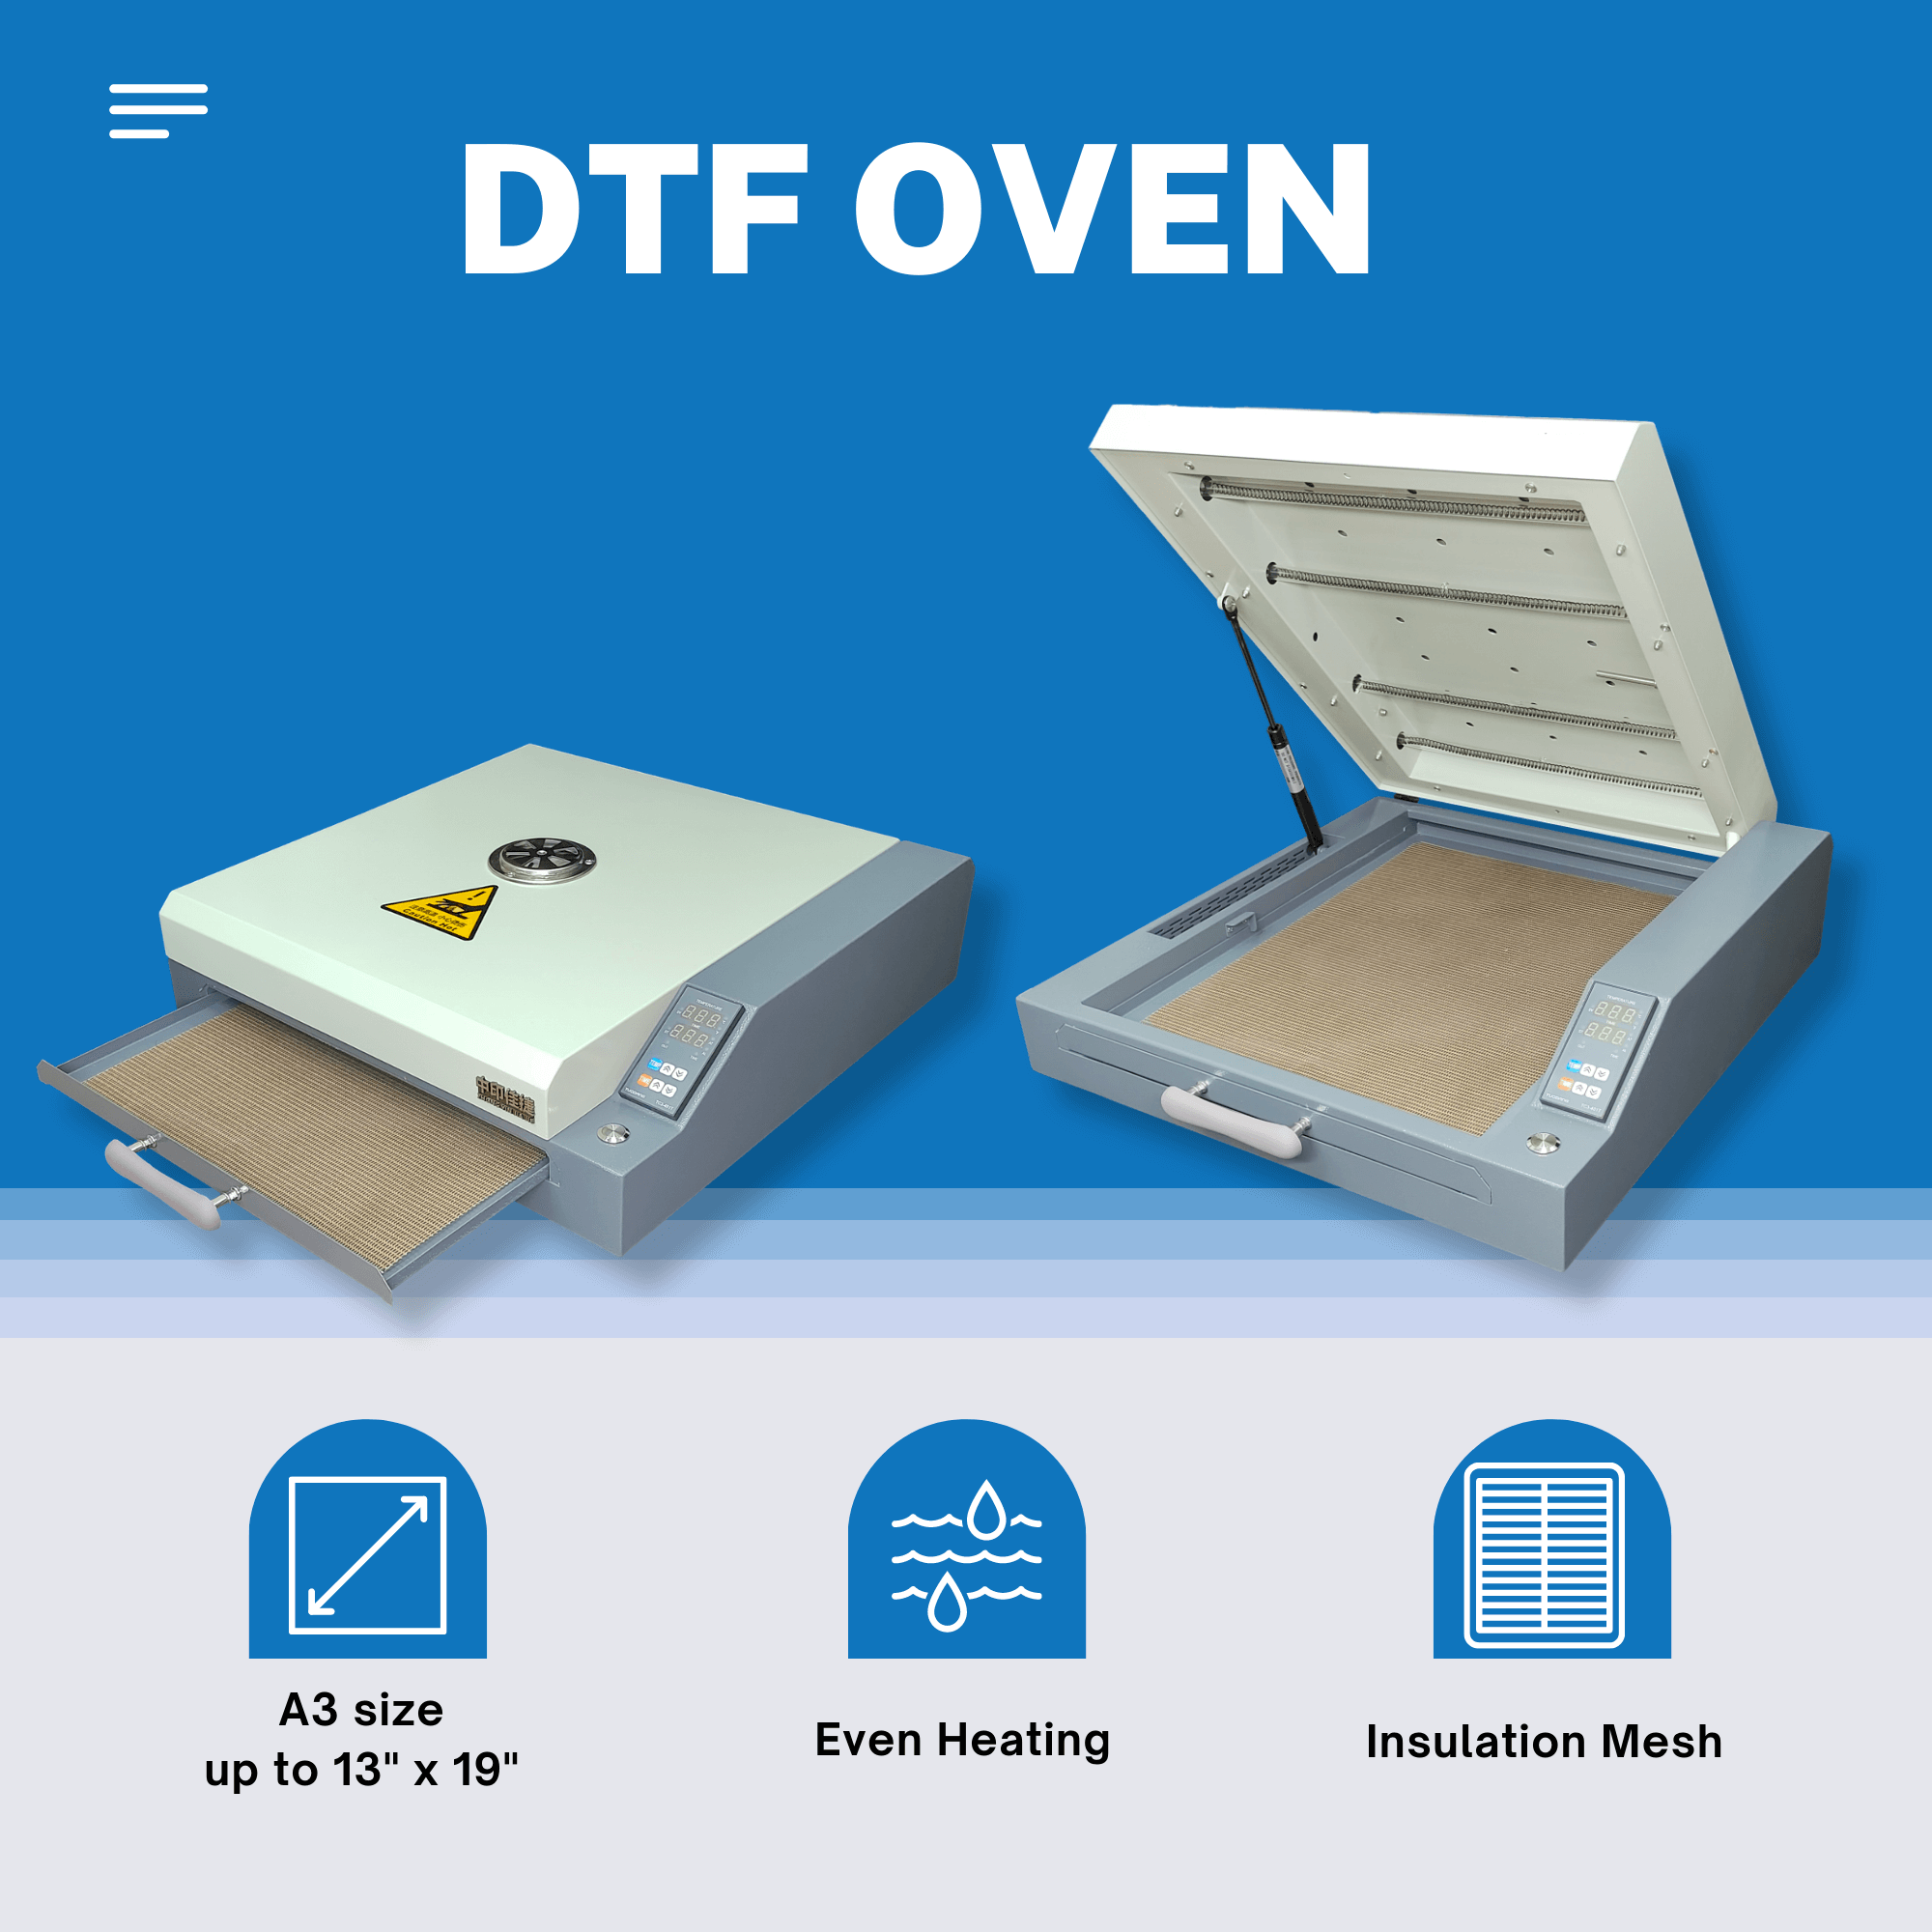 Fast Drying DTF Oven Hot Melt Powder Curing Tool A4/A3/A3+ PET Film Heater  Oven ✓Space-Saving ✓Heating evenly ✓Temperature control,more convenient, By I-Transfer Hoopier Huang